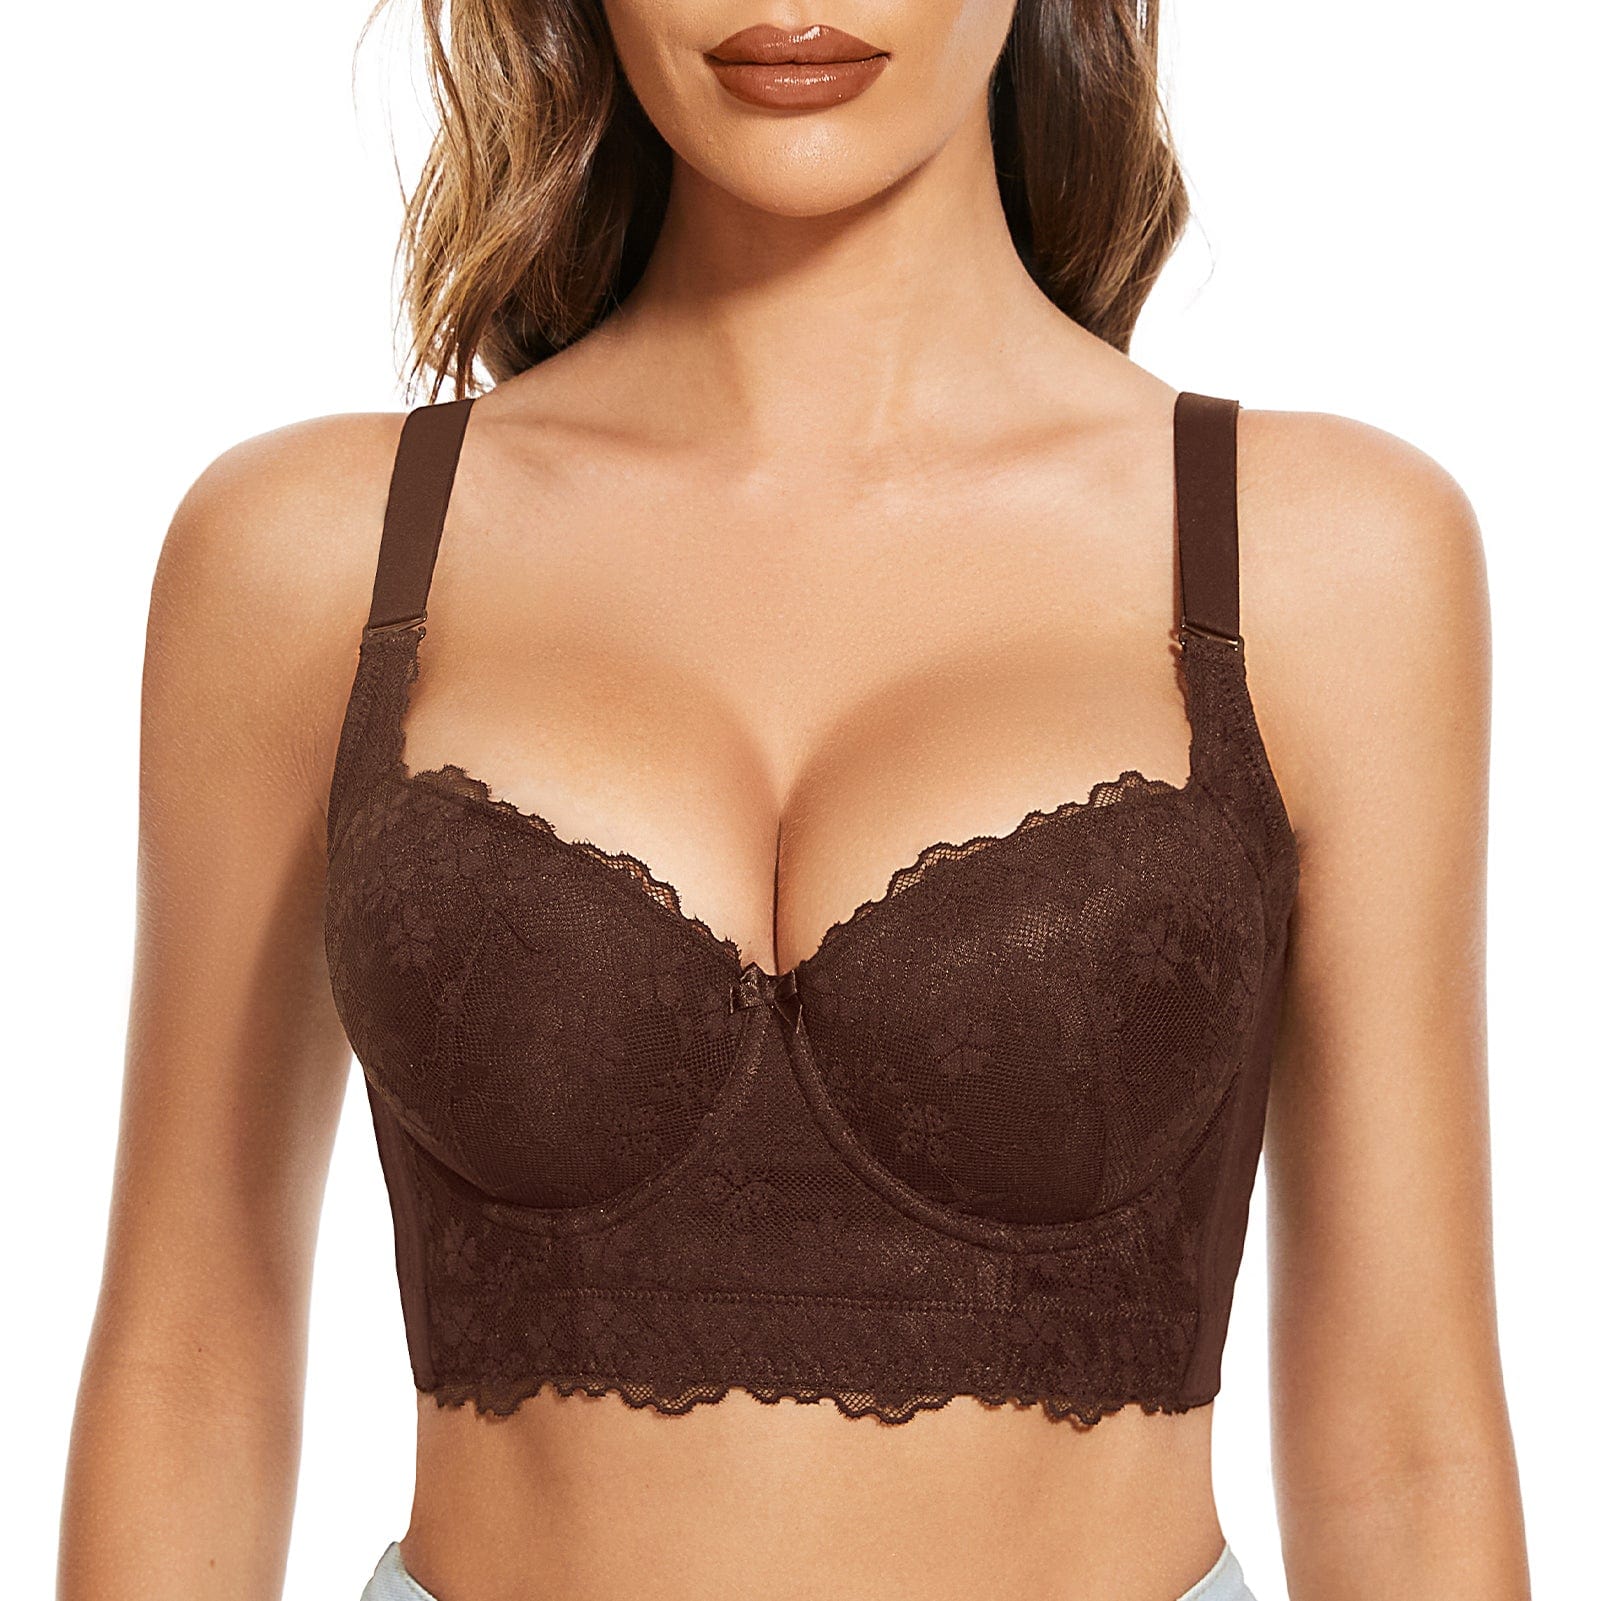 Add One Cup Push Up Bra Underwire Corset Top Bustier-Cocoa